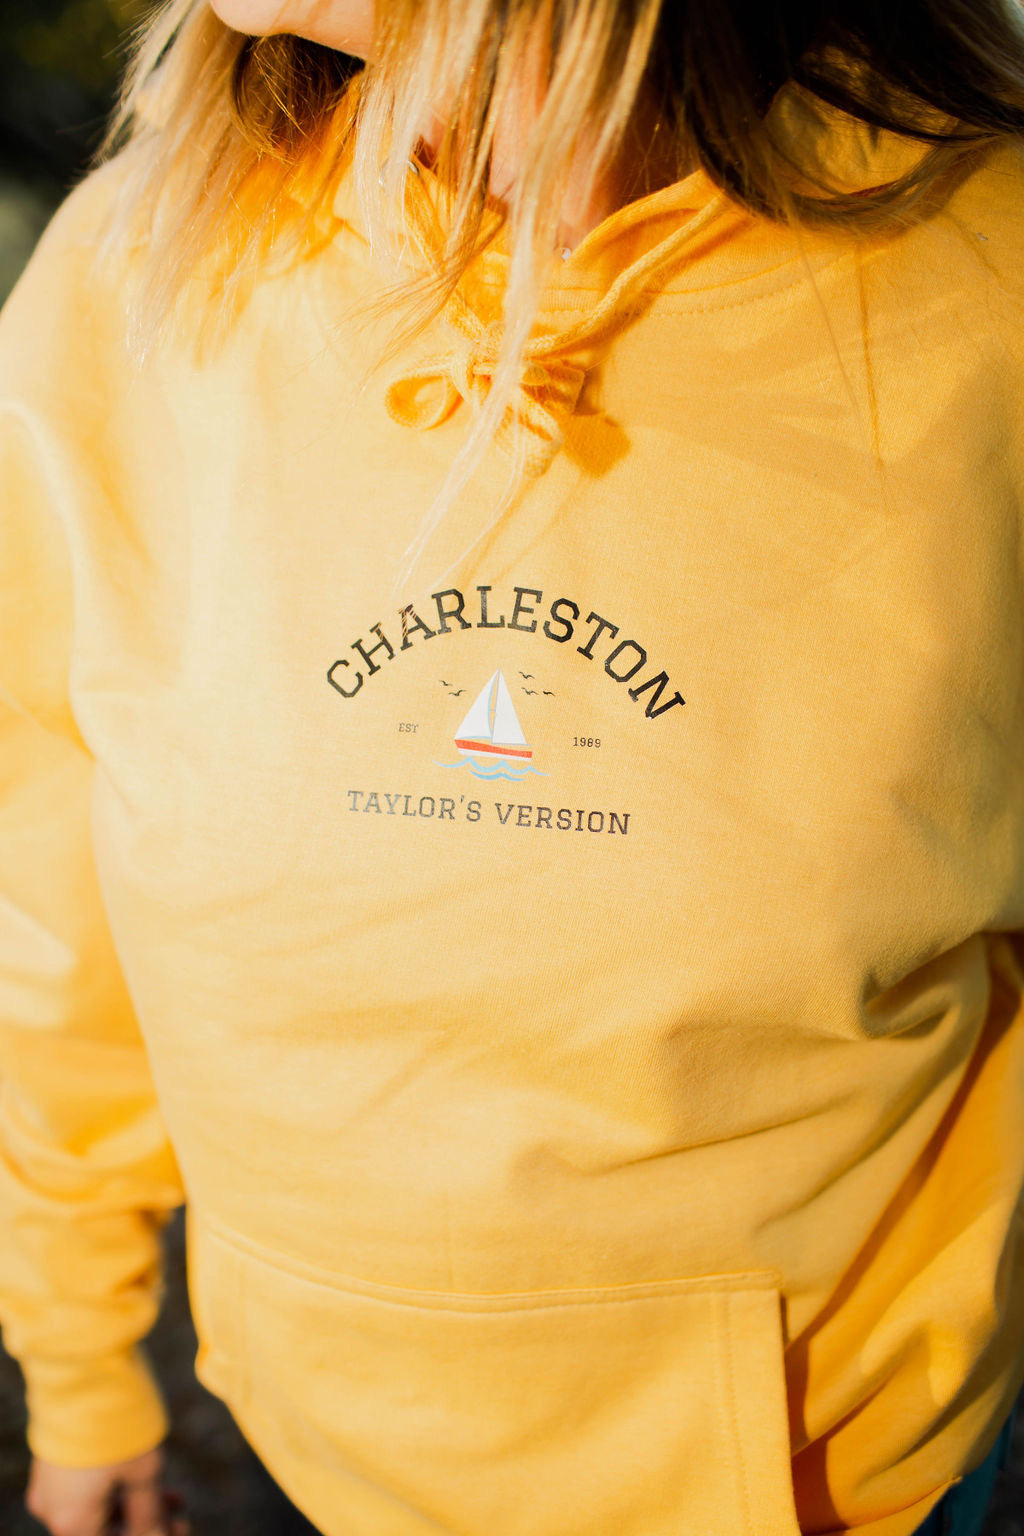 long sleeve mustard yellow hoodie, 6 inch printed graphic depicts the words "CHARLESTON TAYLORS VERSION"